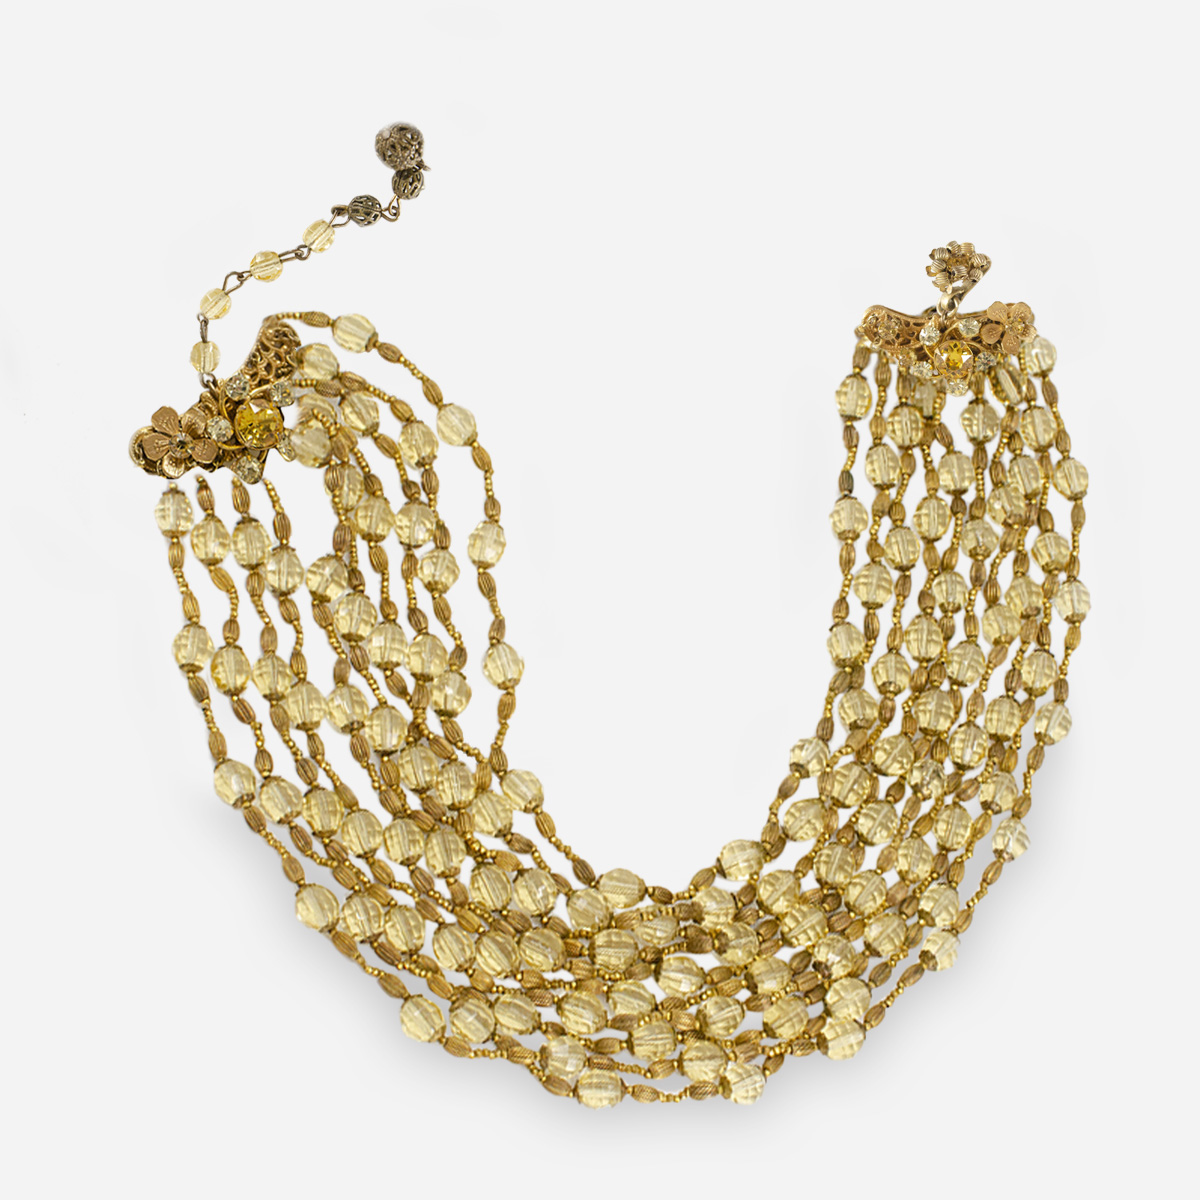 gold beaded necklace